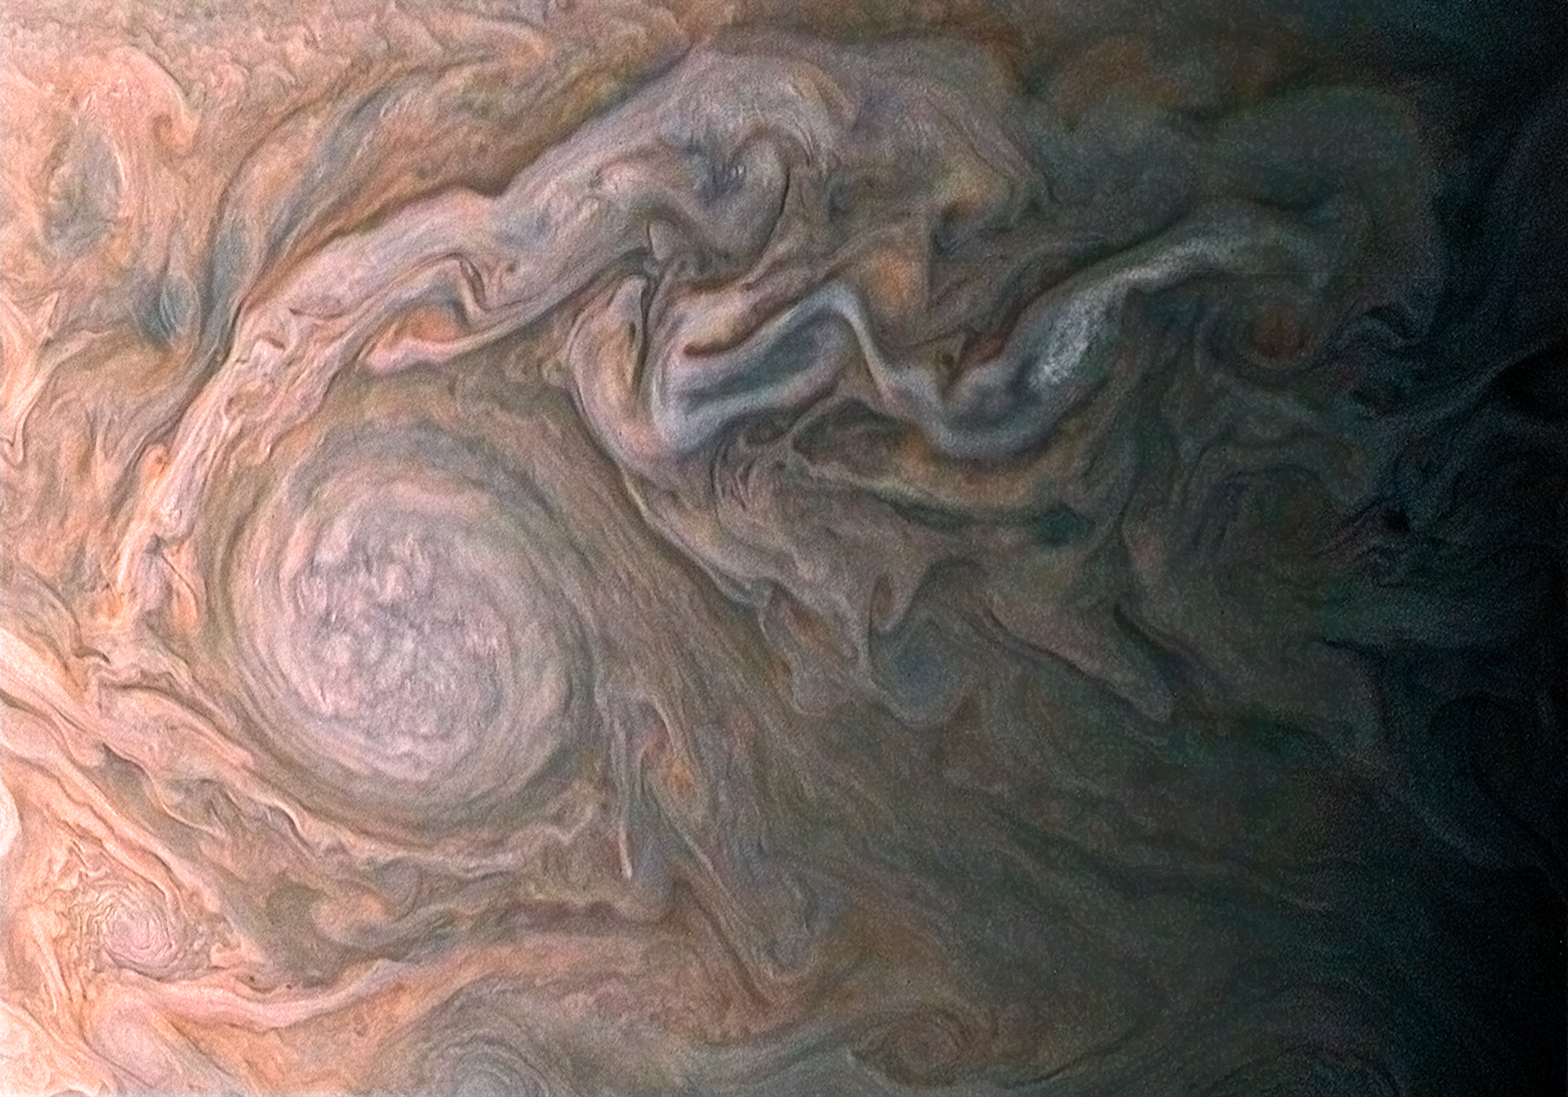 A closeup of the surface of Jupiter's atmosphere showing very detailed and chaotic bands of different colors